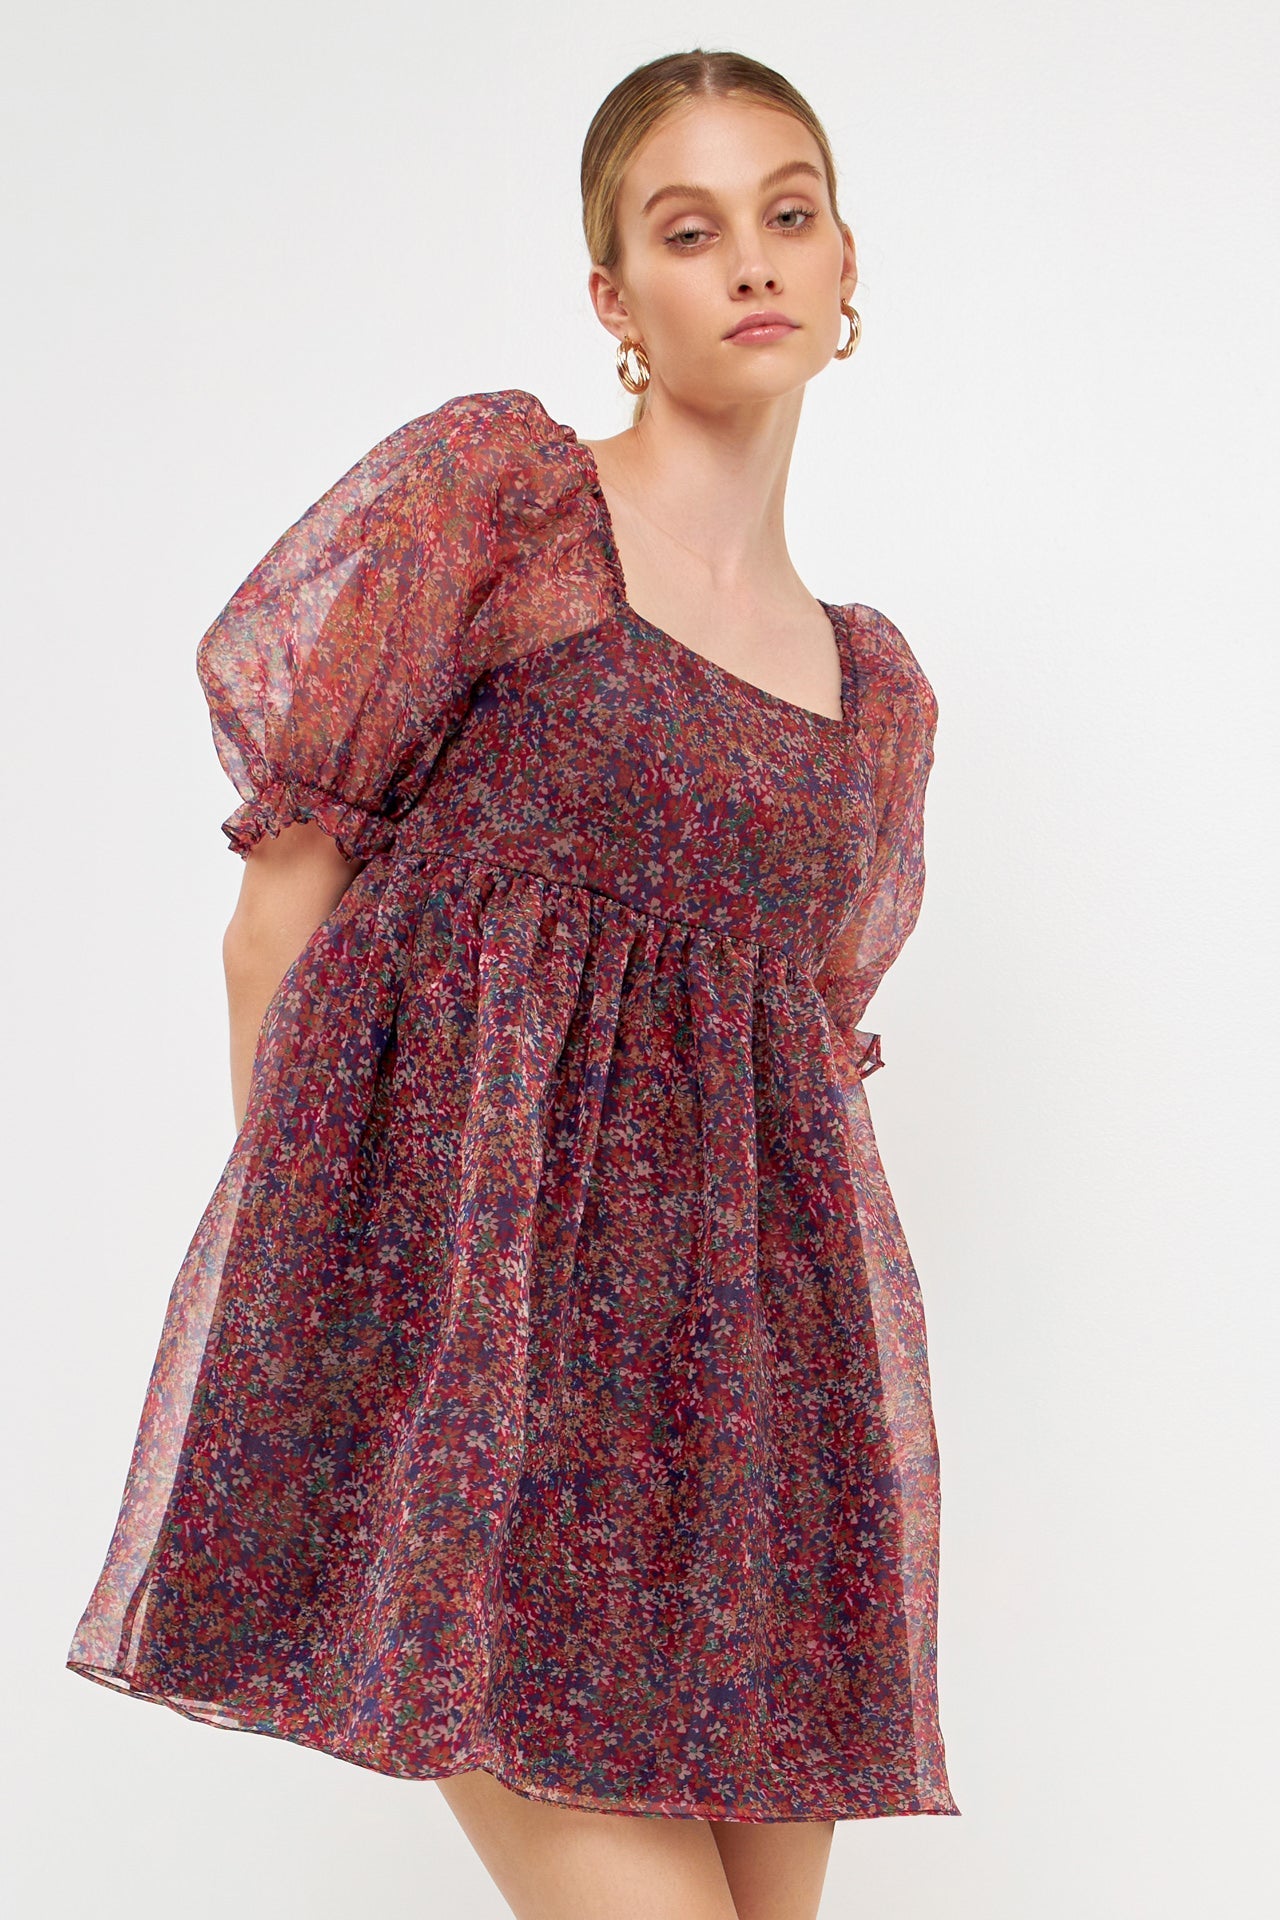 Wild Fable Dress  Dress, Wild fable, Puffed sleeves dress